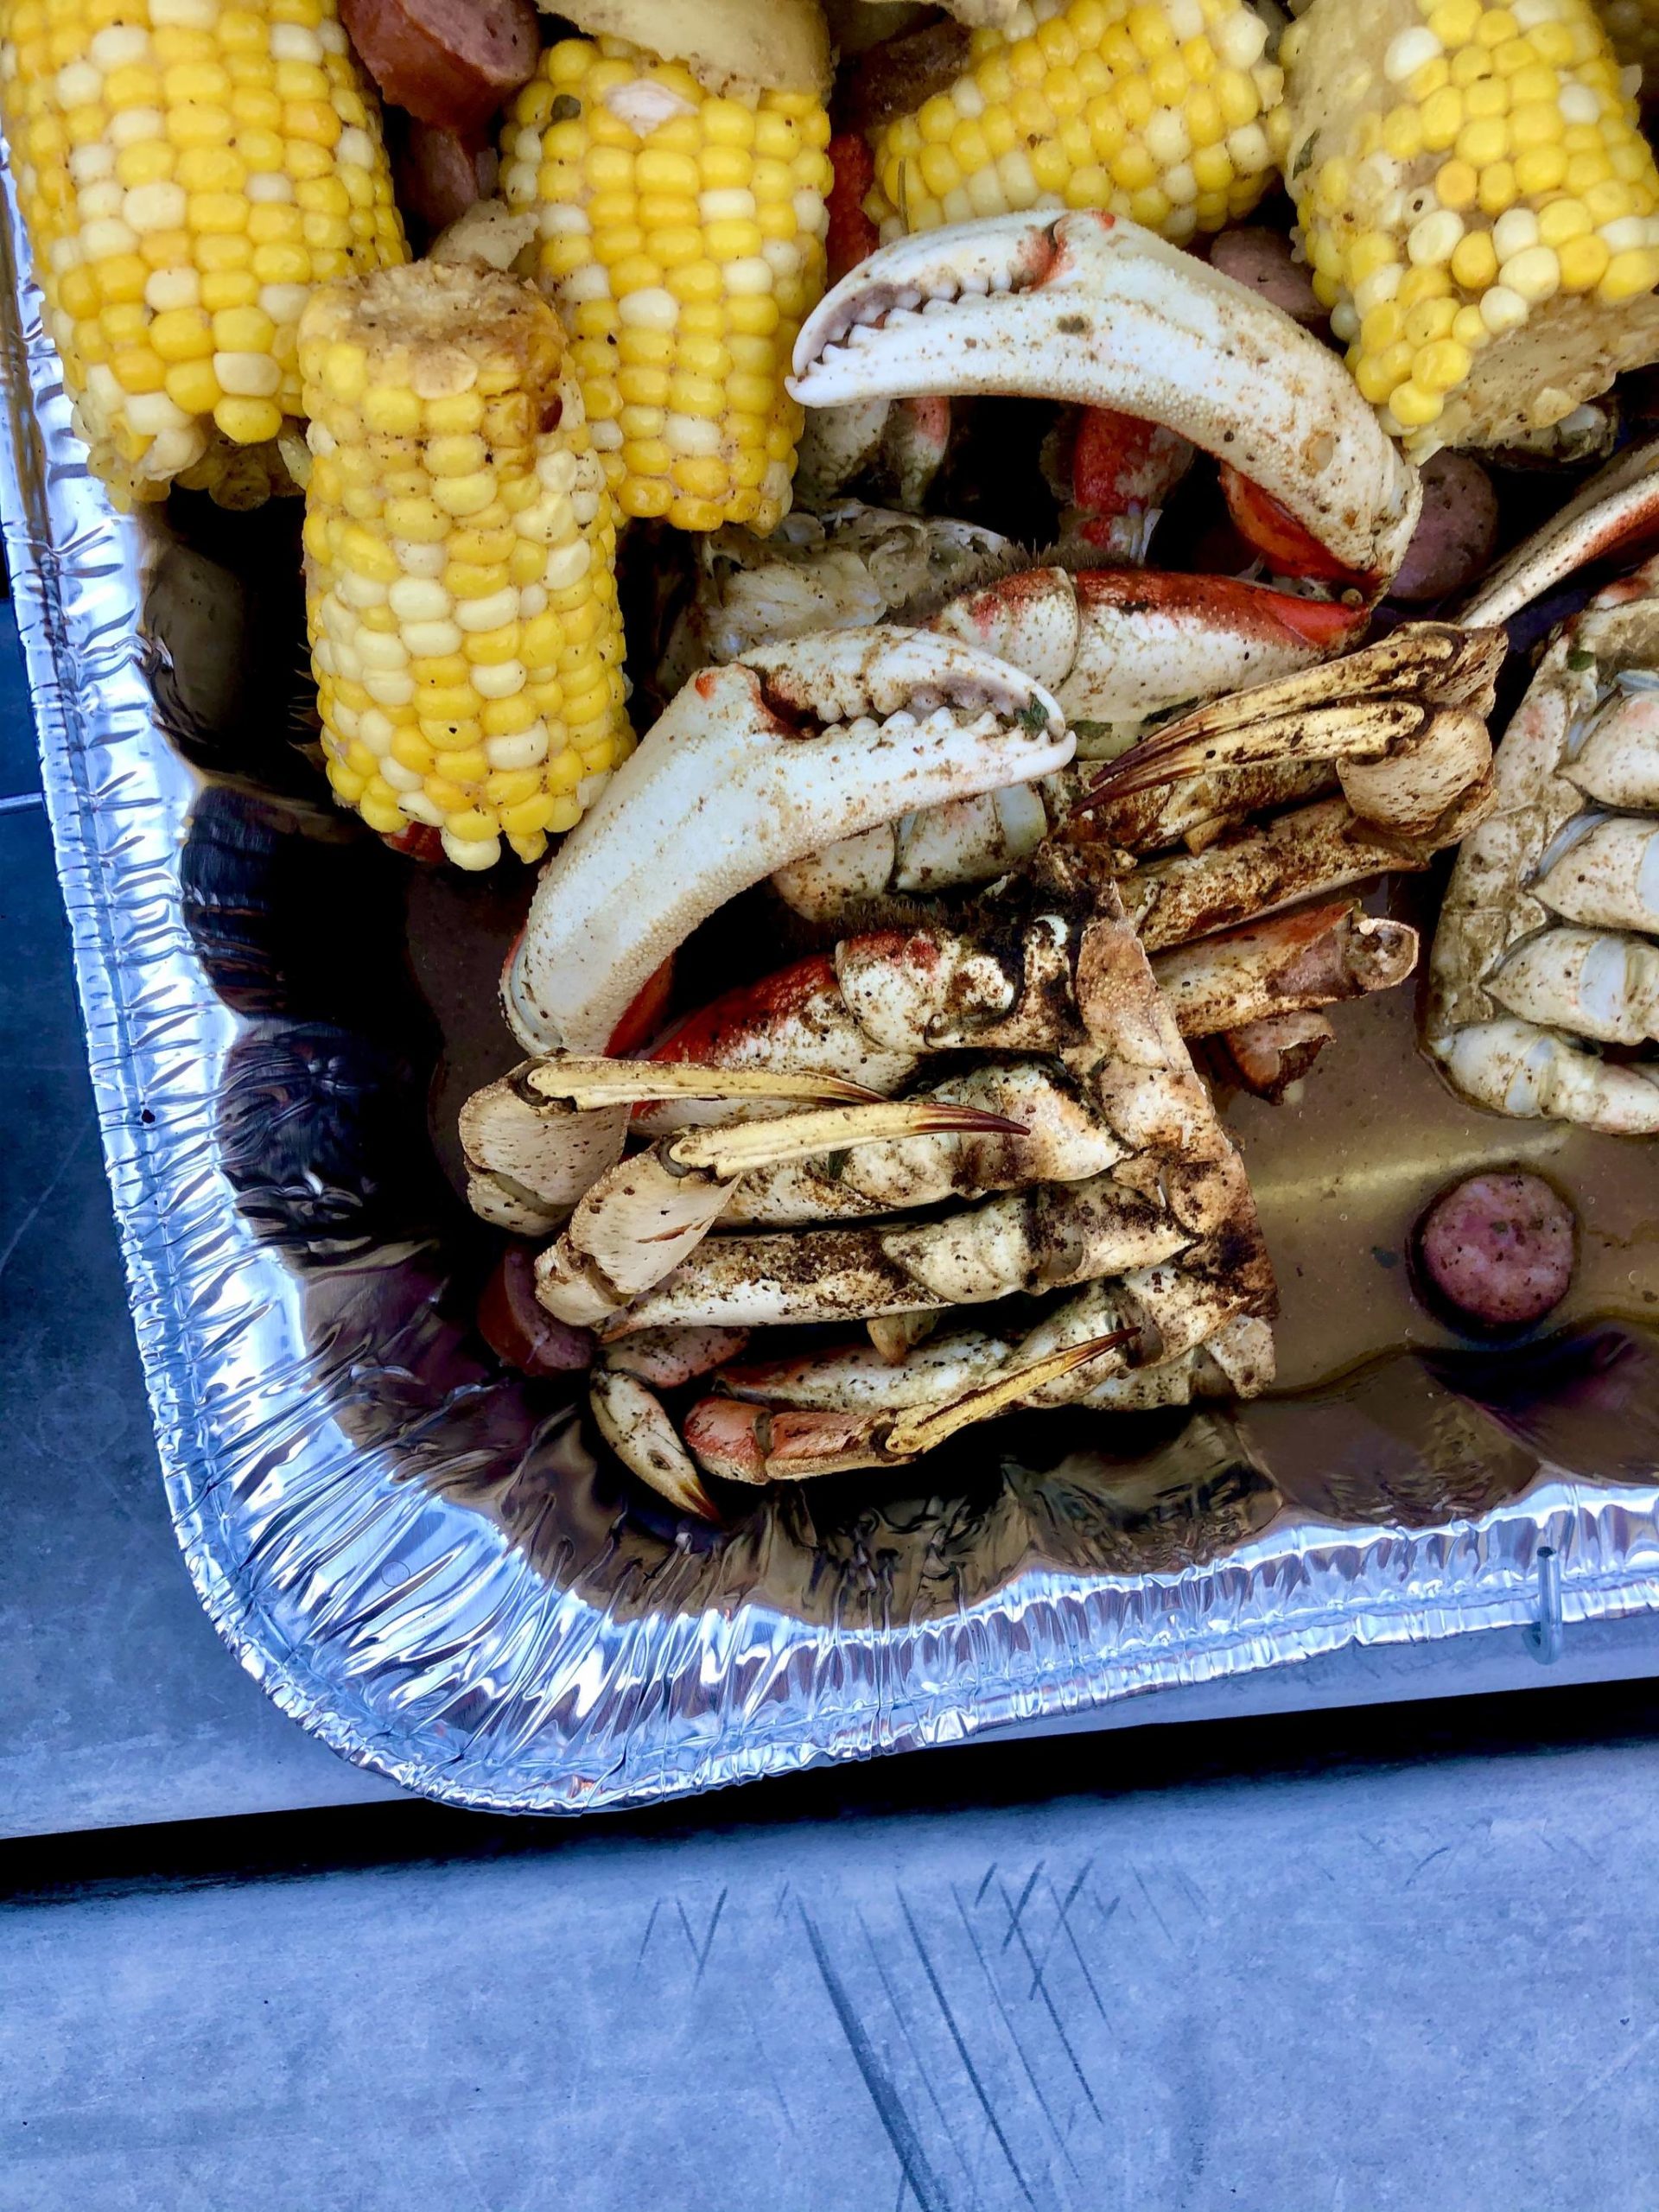 A crab boil to celebrate a friends birthday, on Sunday, Aug. 16, 2020 in Anchorage, Alaska. (Photo by Victoria Petersen/Peninsula Clarion)